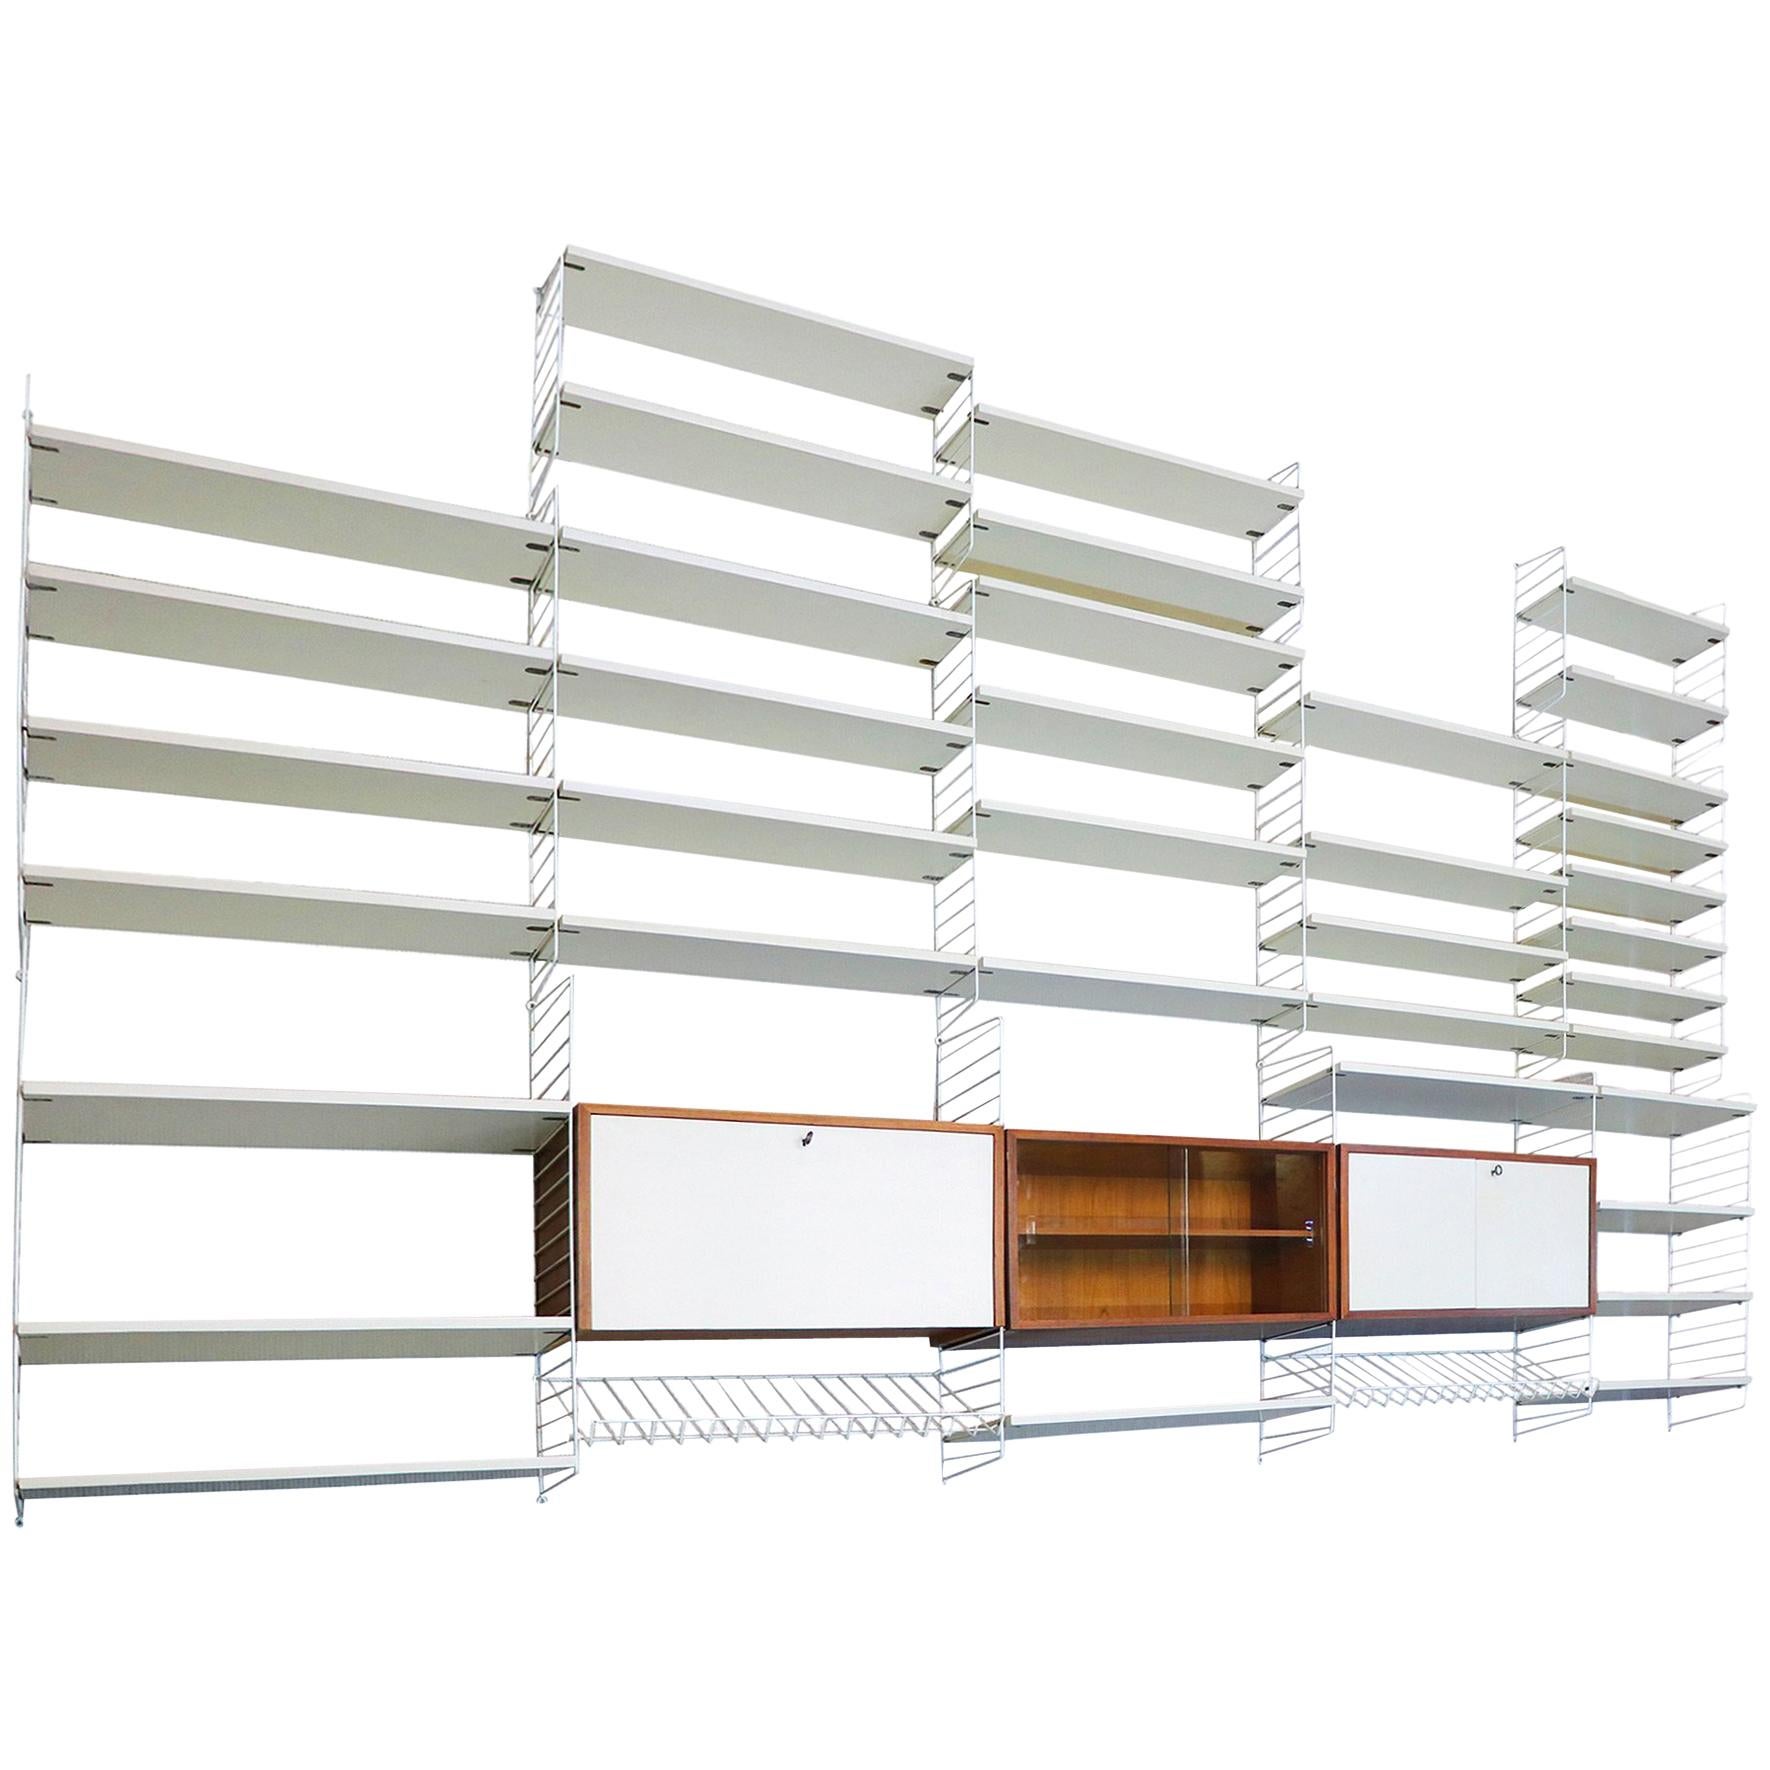 1960s Bokhyllan ’the Ladder Shelf’ Shelving System by Nisse Strinning for String